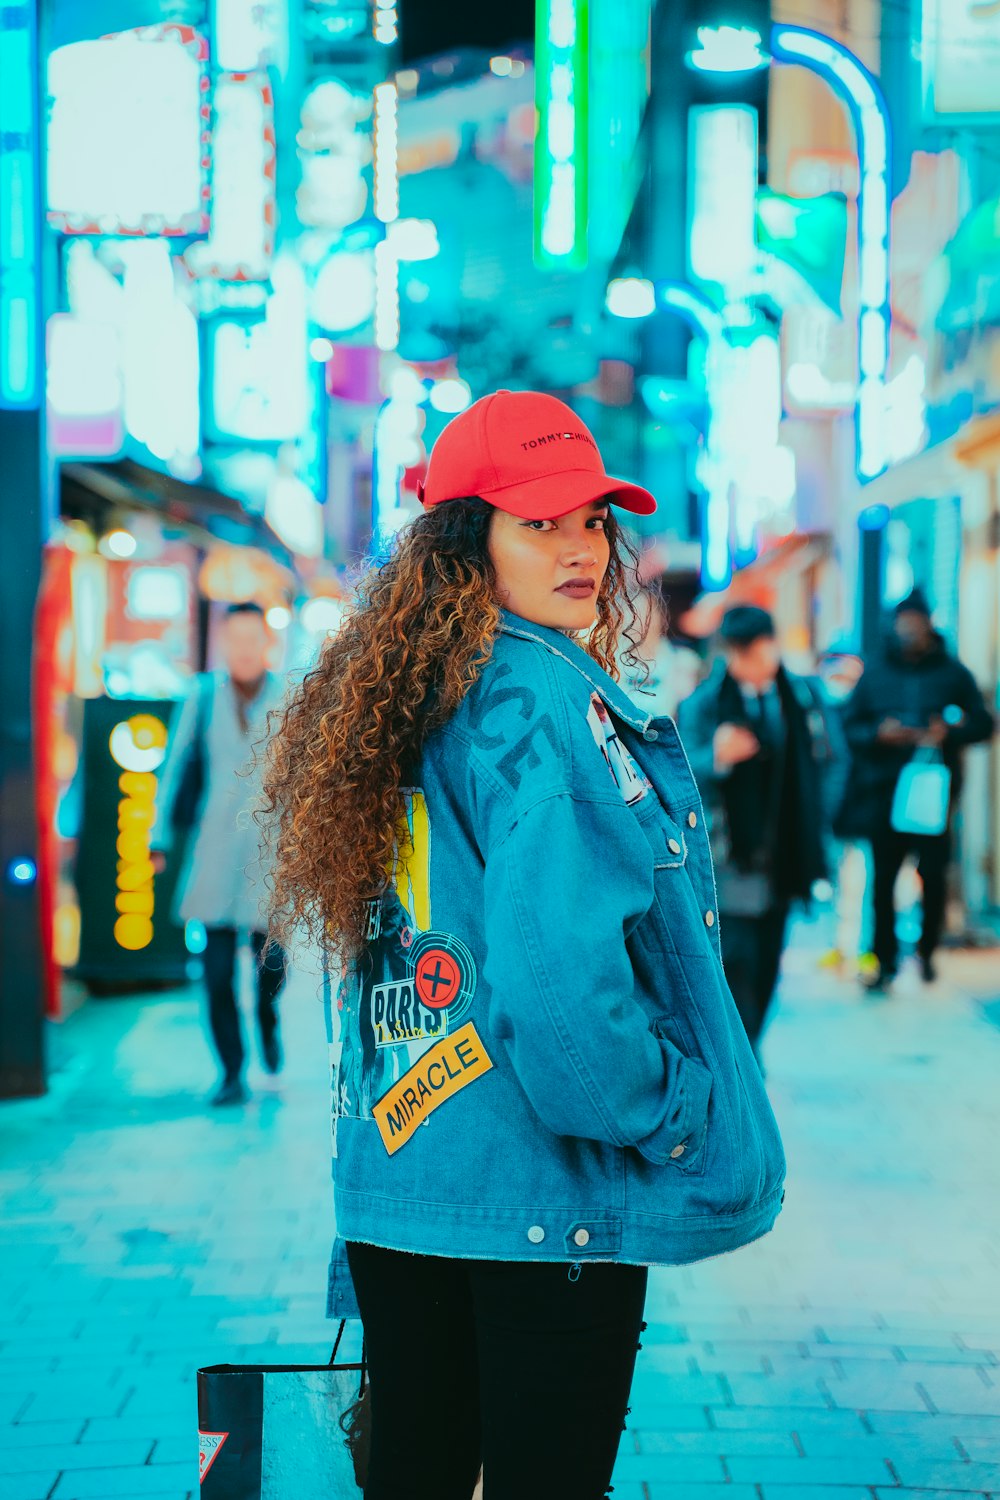 woman in blue denim jacket and red knit cap standing on street during daytime